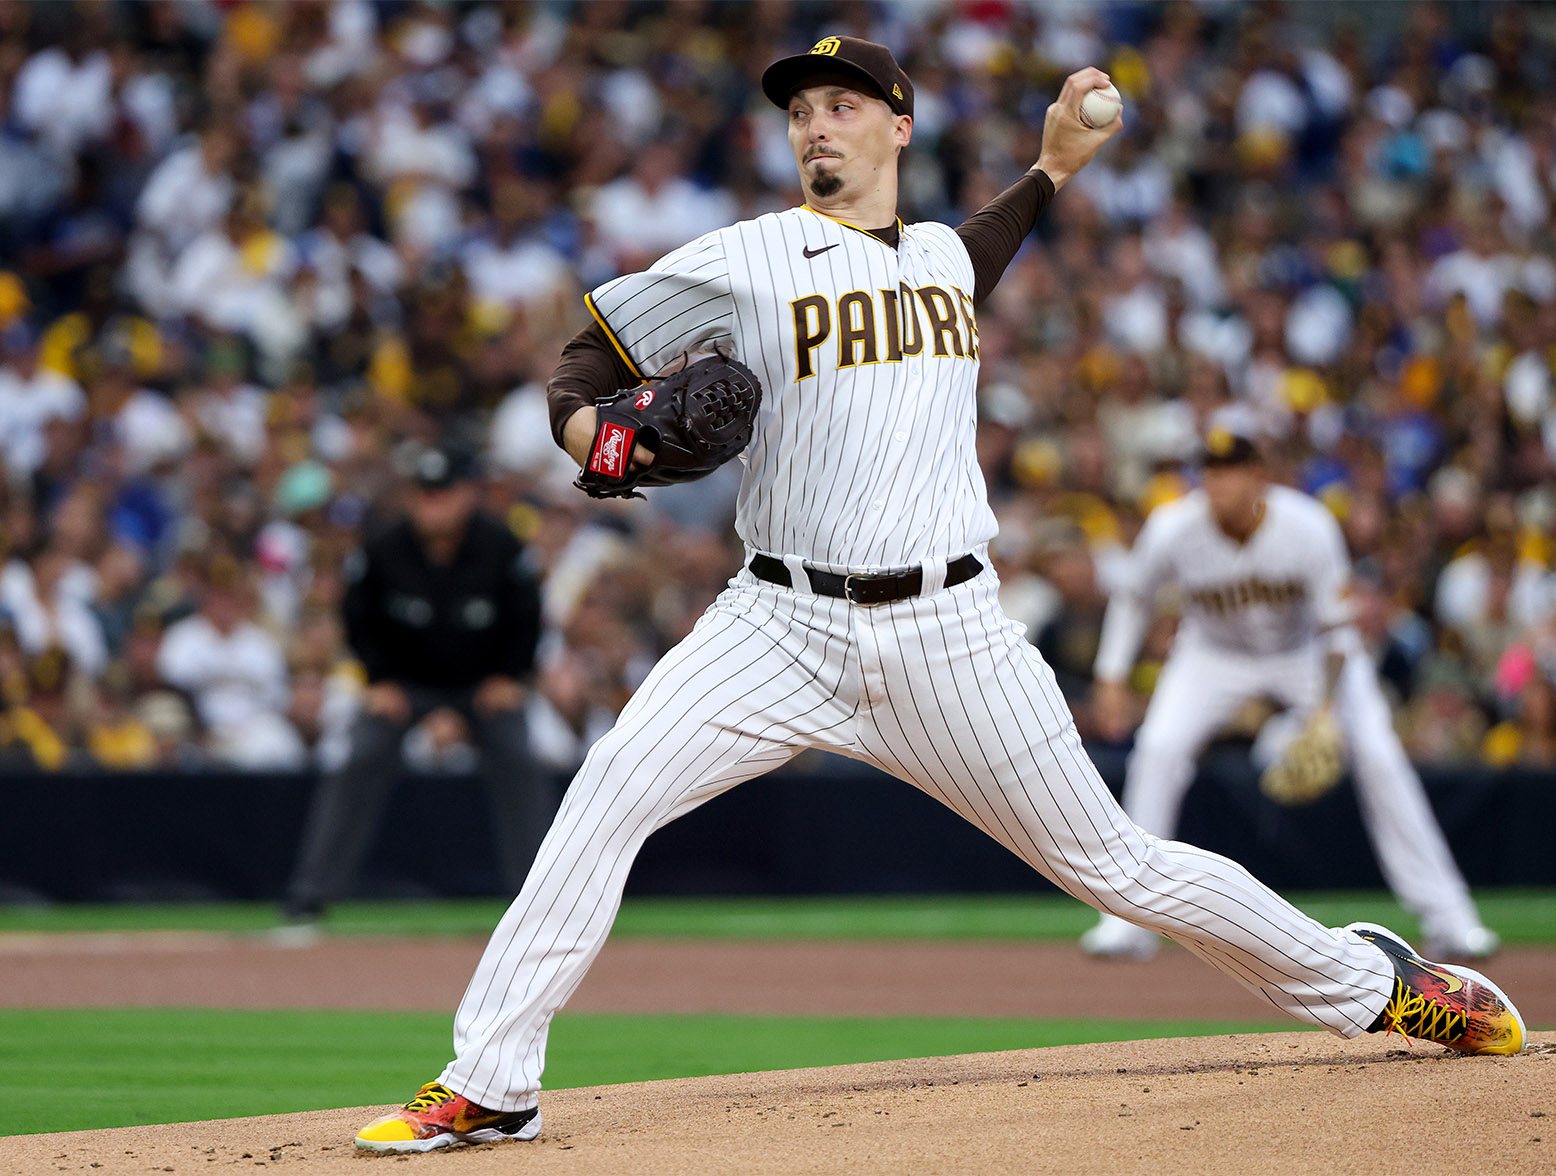 SAN DIEGO, CALIFORNIA - OCTOBER 14: Blake Snell #4 of the San Diego Padres delivers a pitch against the Los Angeles Dodgers during the first inning in game three of the National League Division Series at PETCO Park on October 14, 2022 in San Diego, California. (Photo by Harry How/Getty Images)